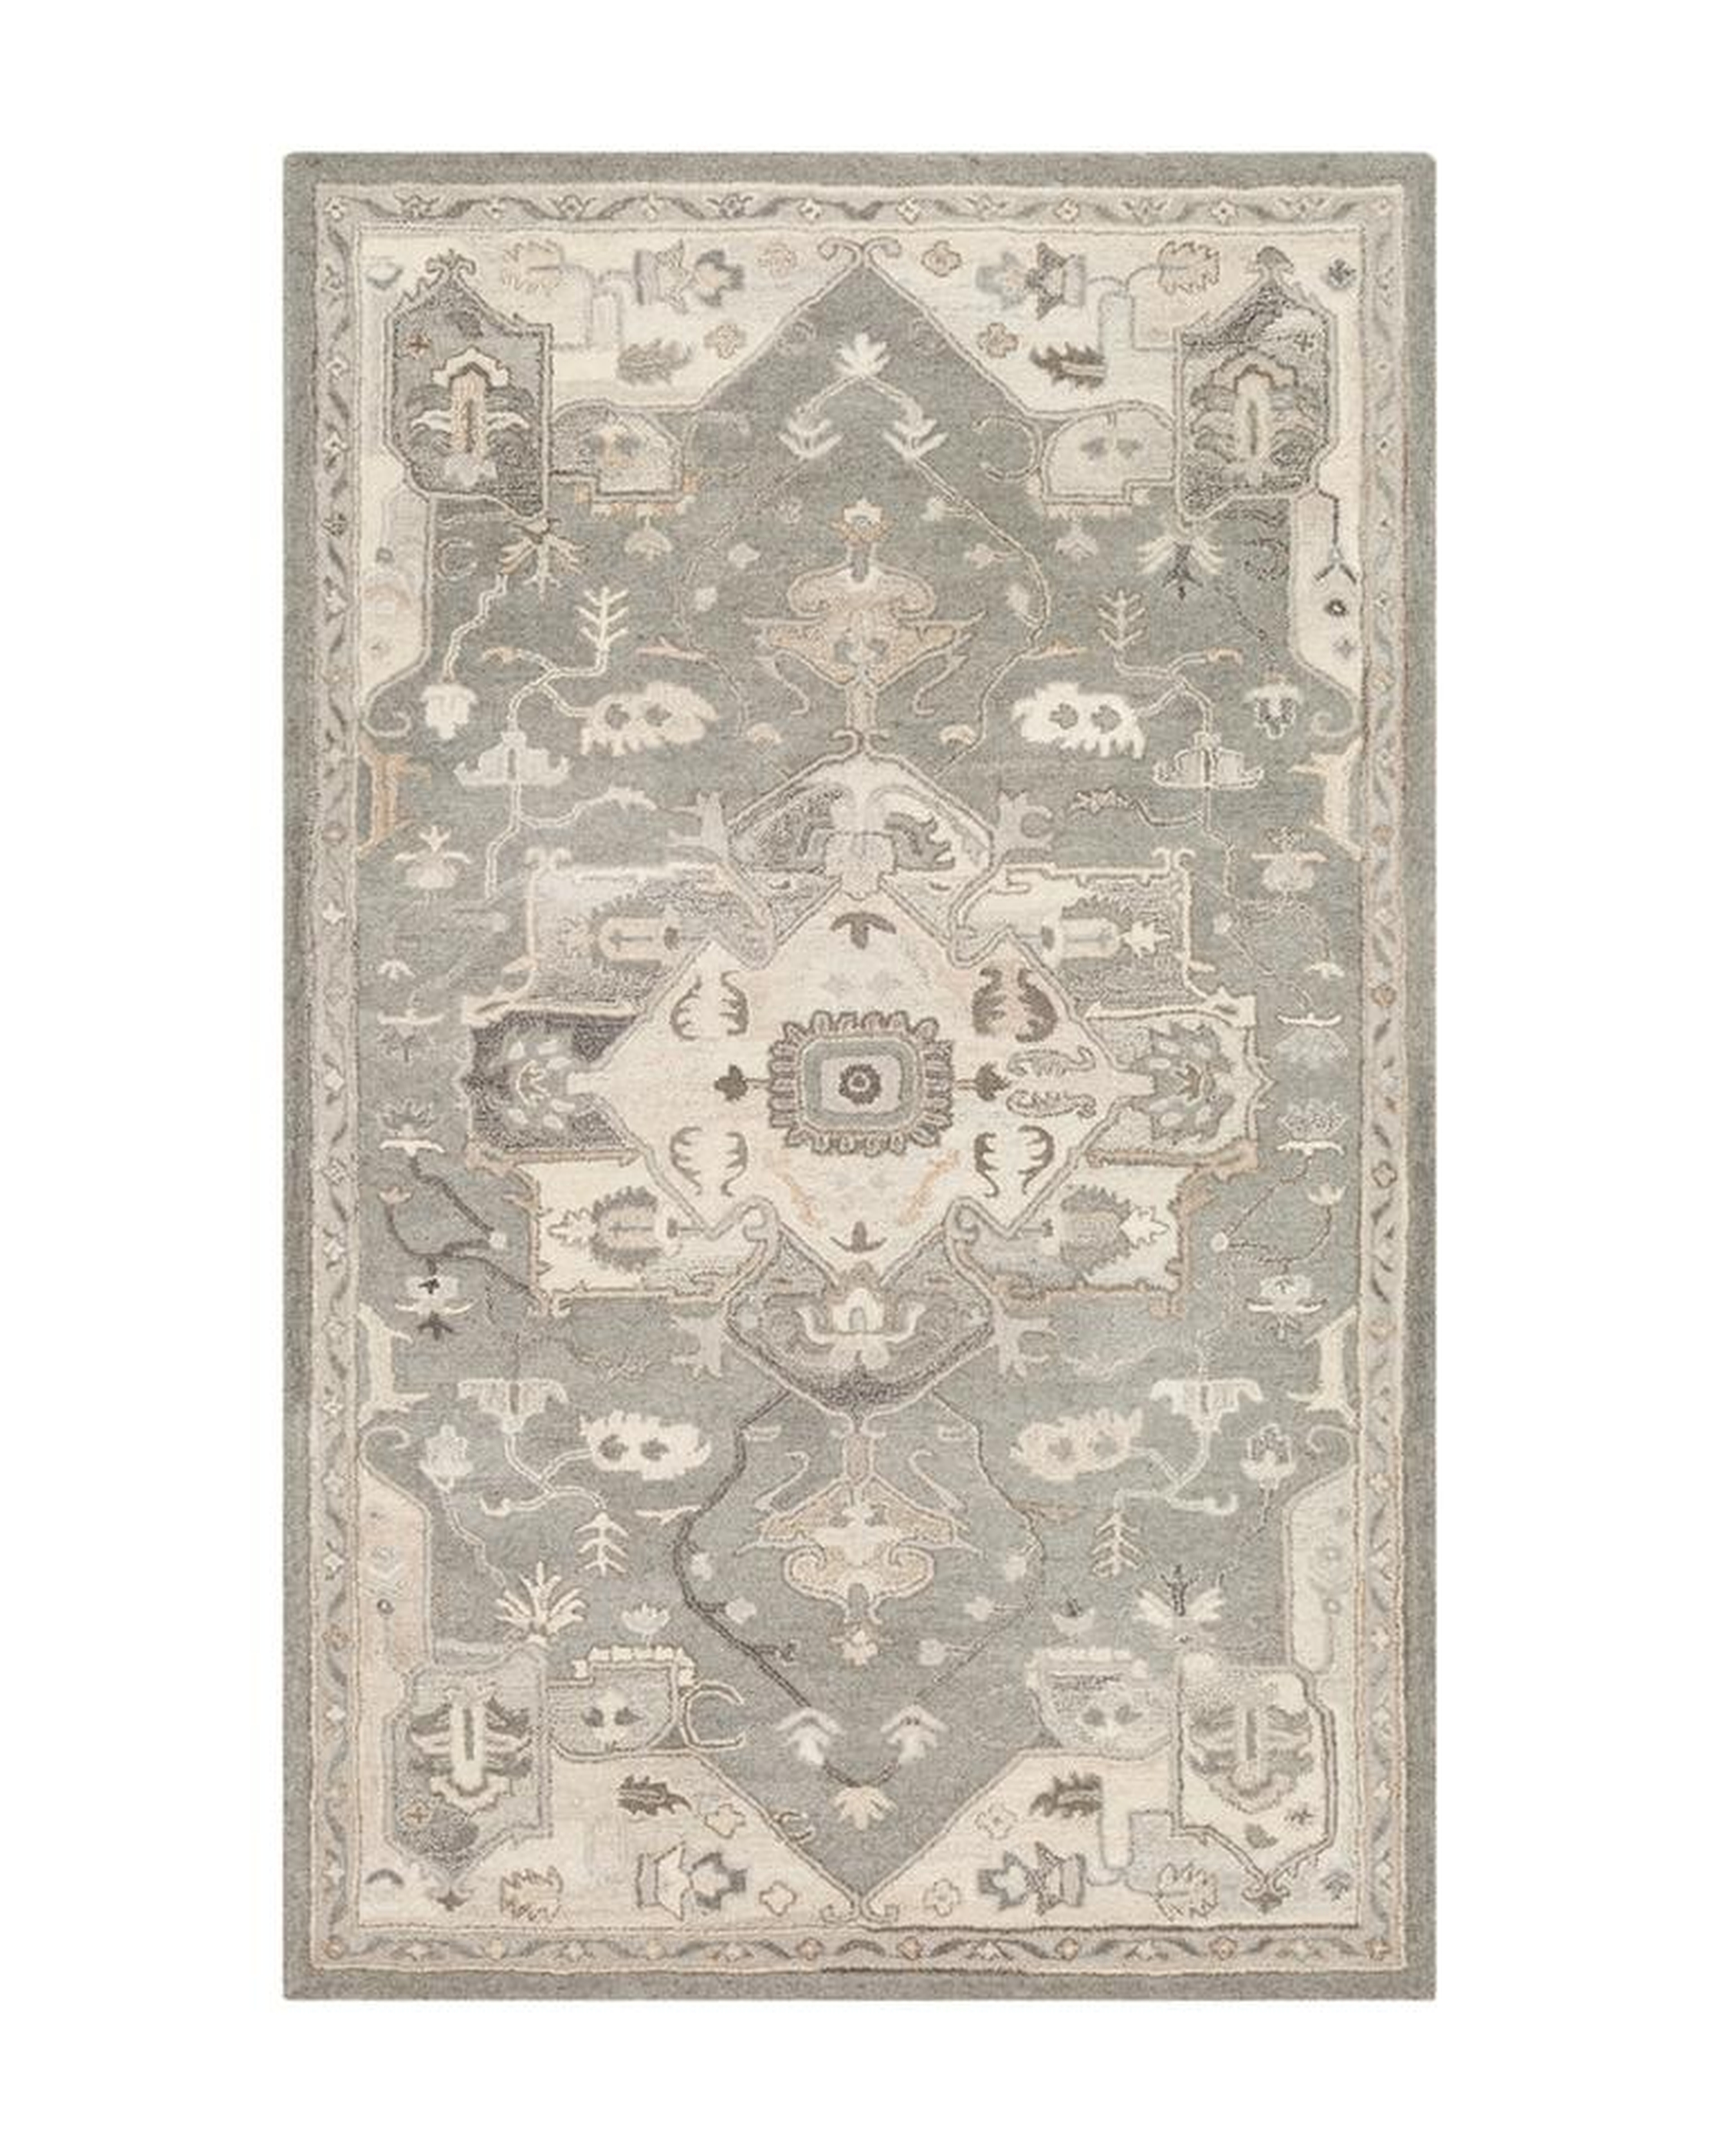 EUGENE HAND-TUFTED WOOL RUG, 6' x 9' - McGee & Co.